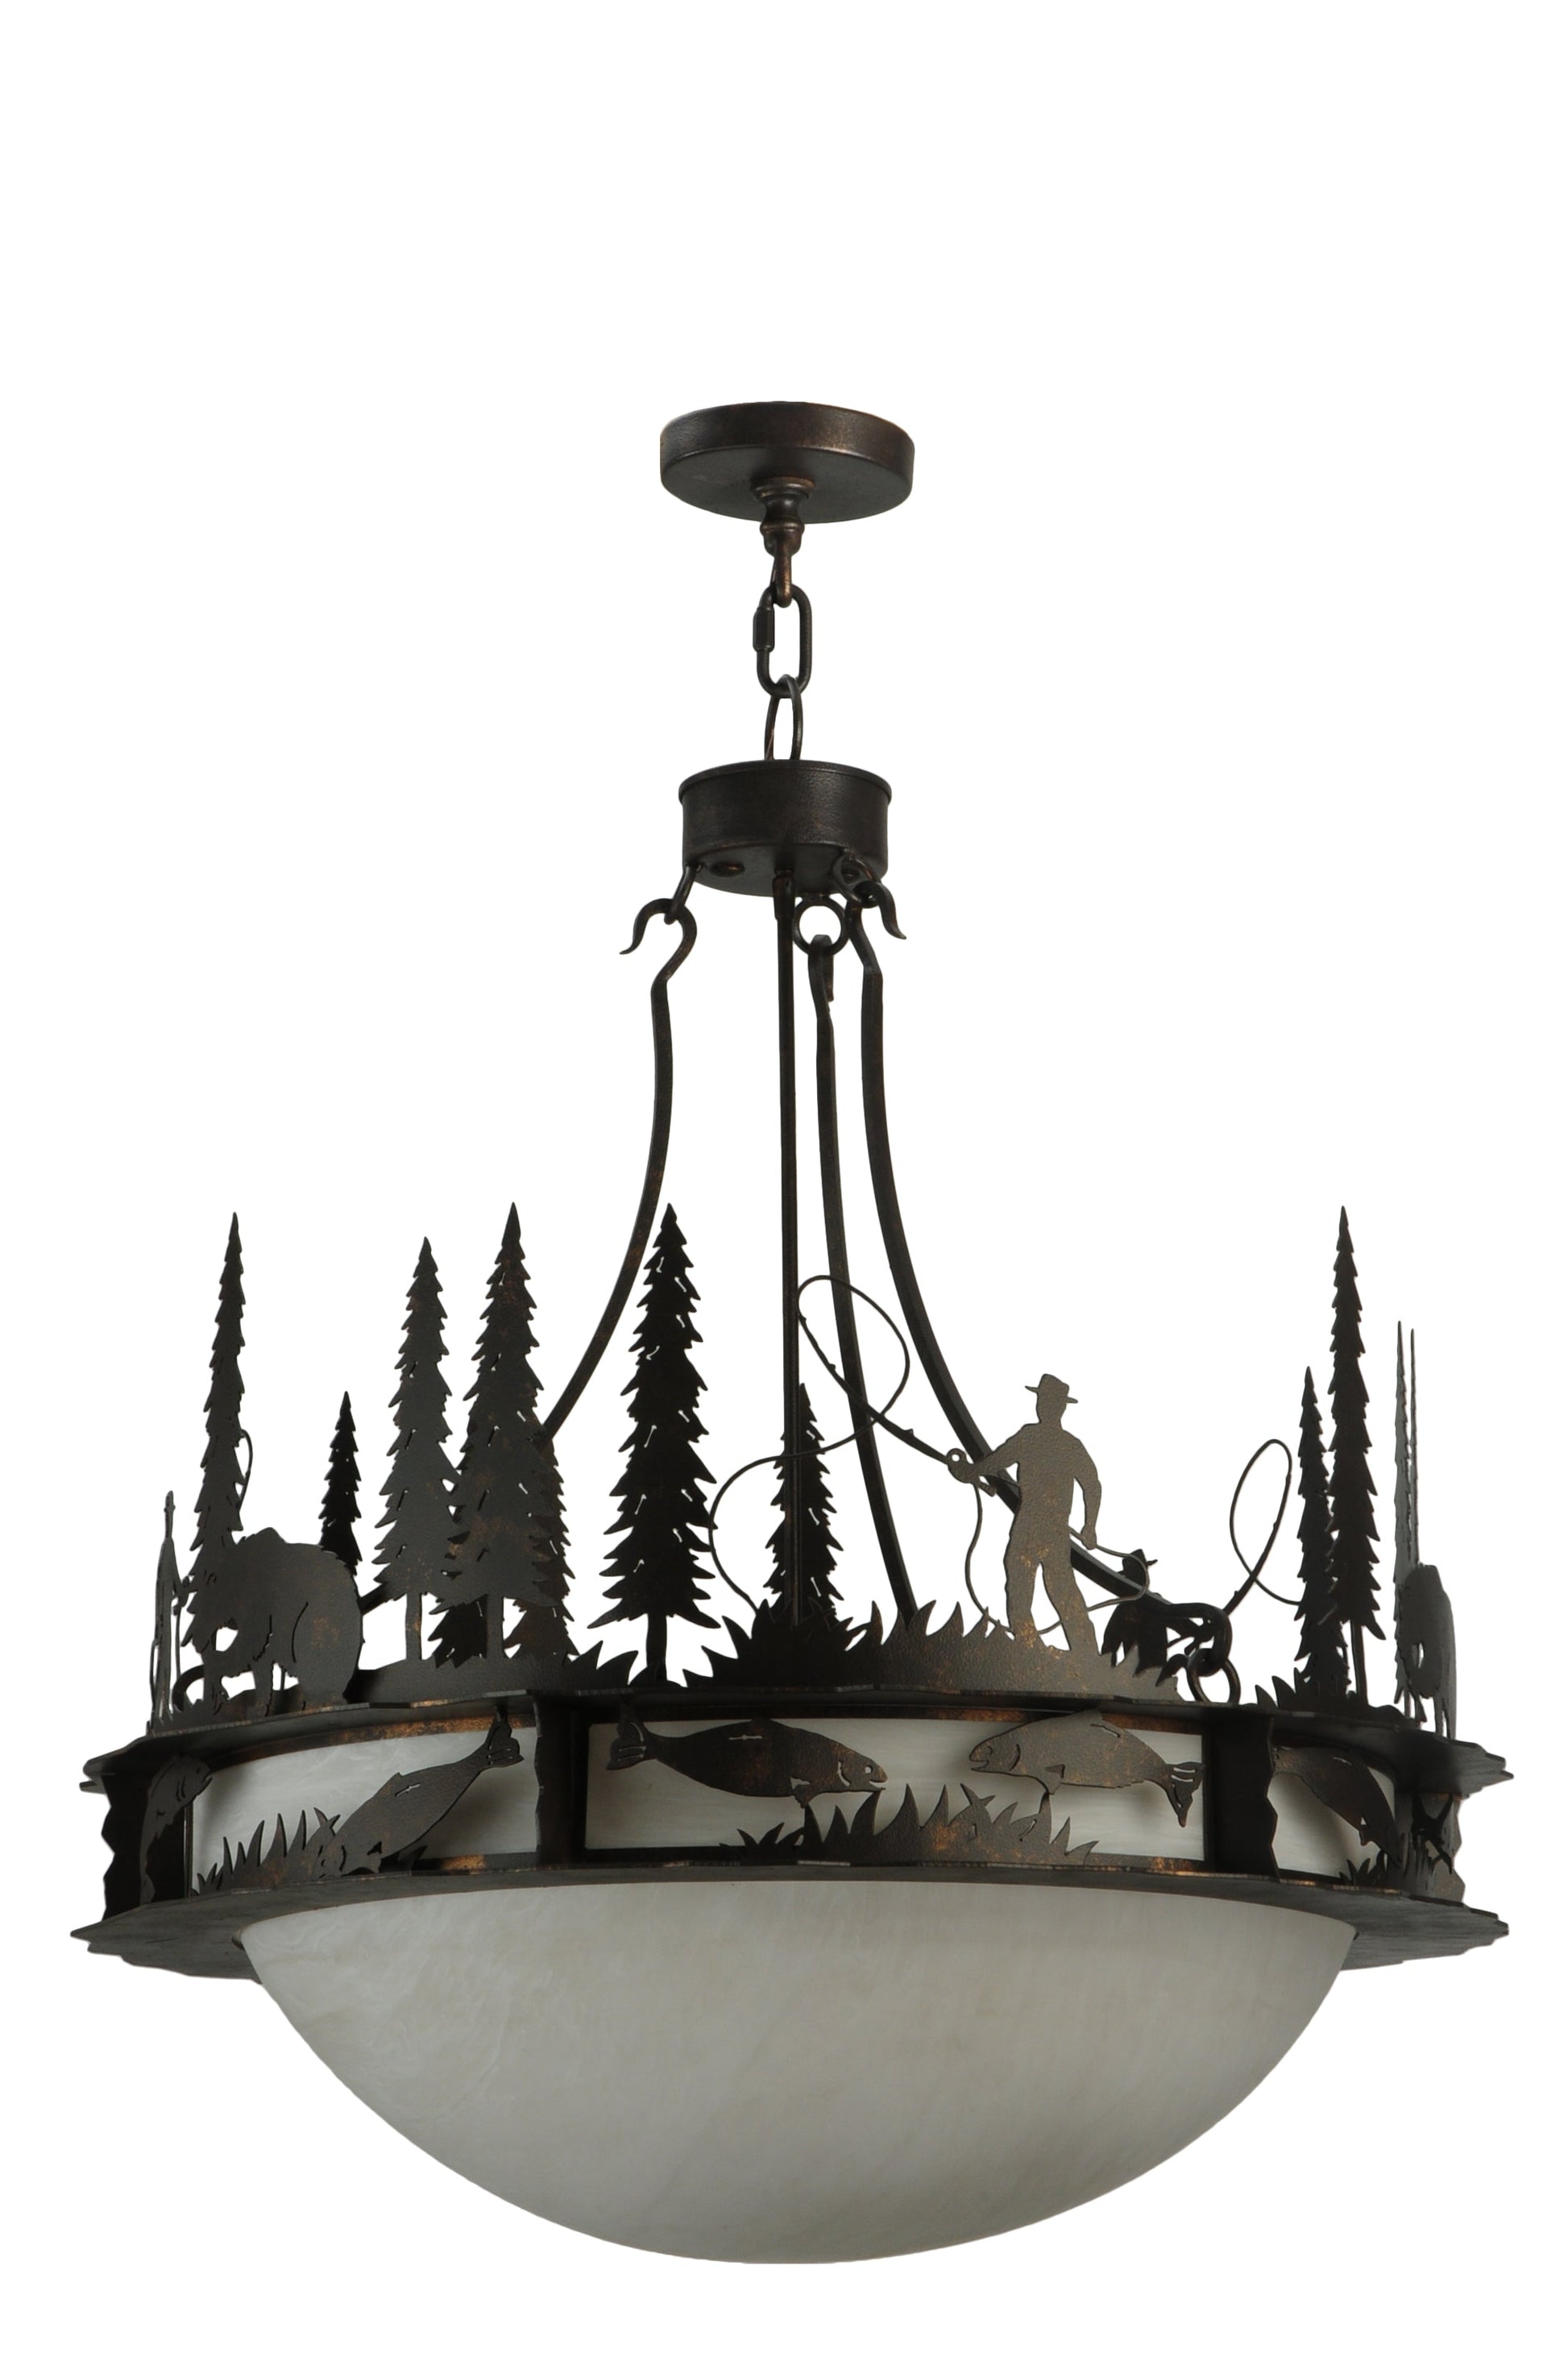 32" Fisherman Grizzly Bear Inverted Pendant by 2nd Ave Lighting